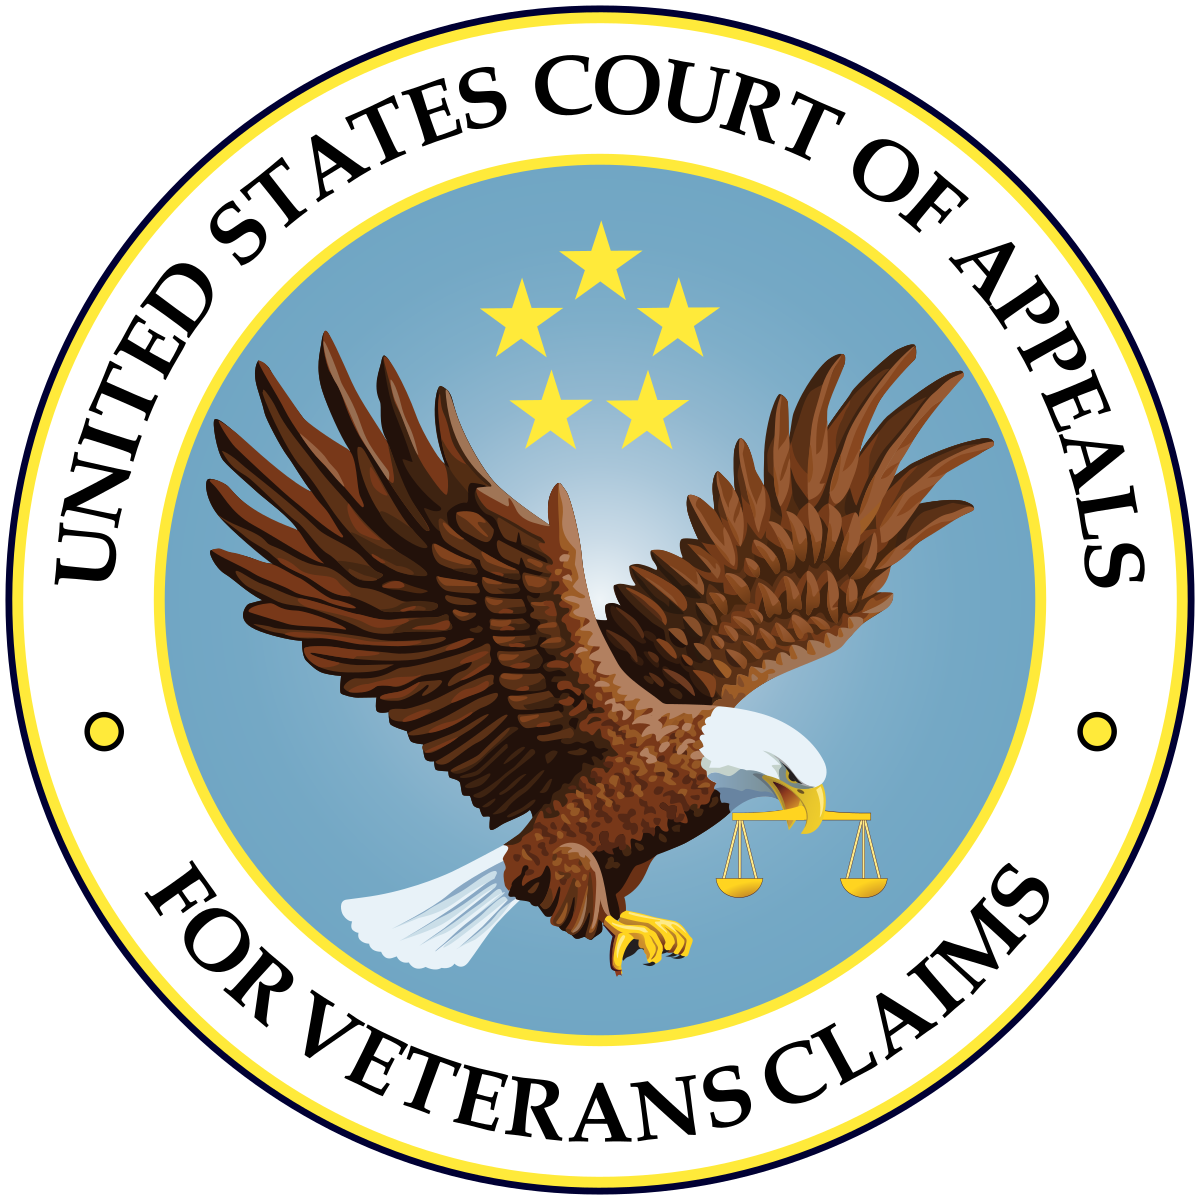 1200px-Seal_of_the_United_States_Court_of_Appeals_for_Veterans_Claims.svg.png